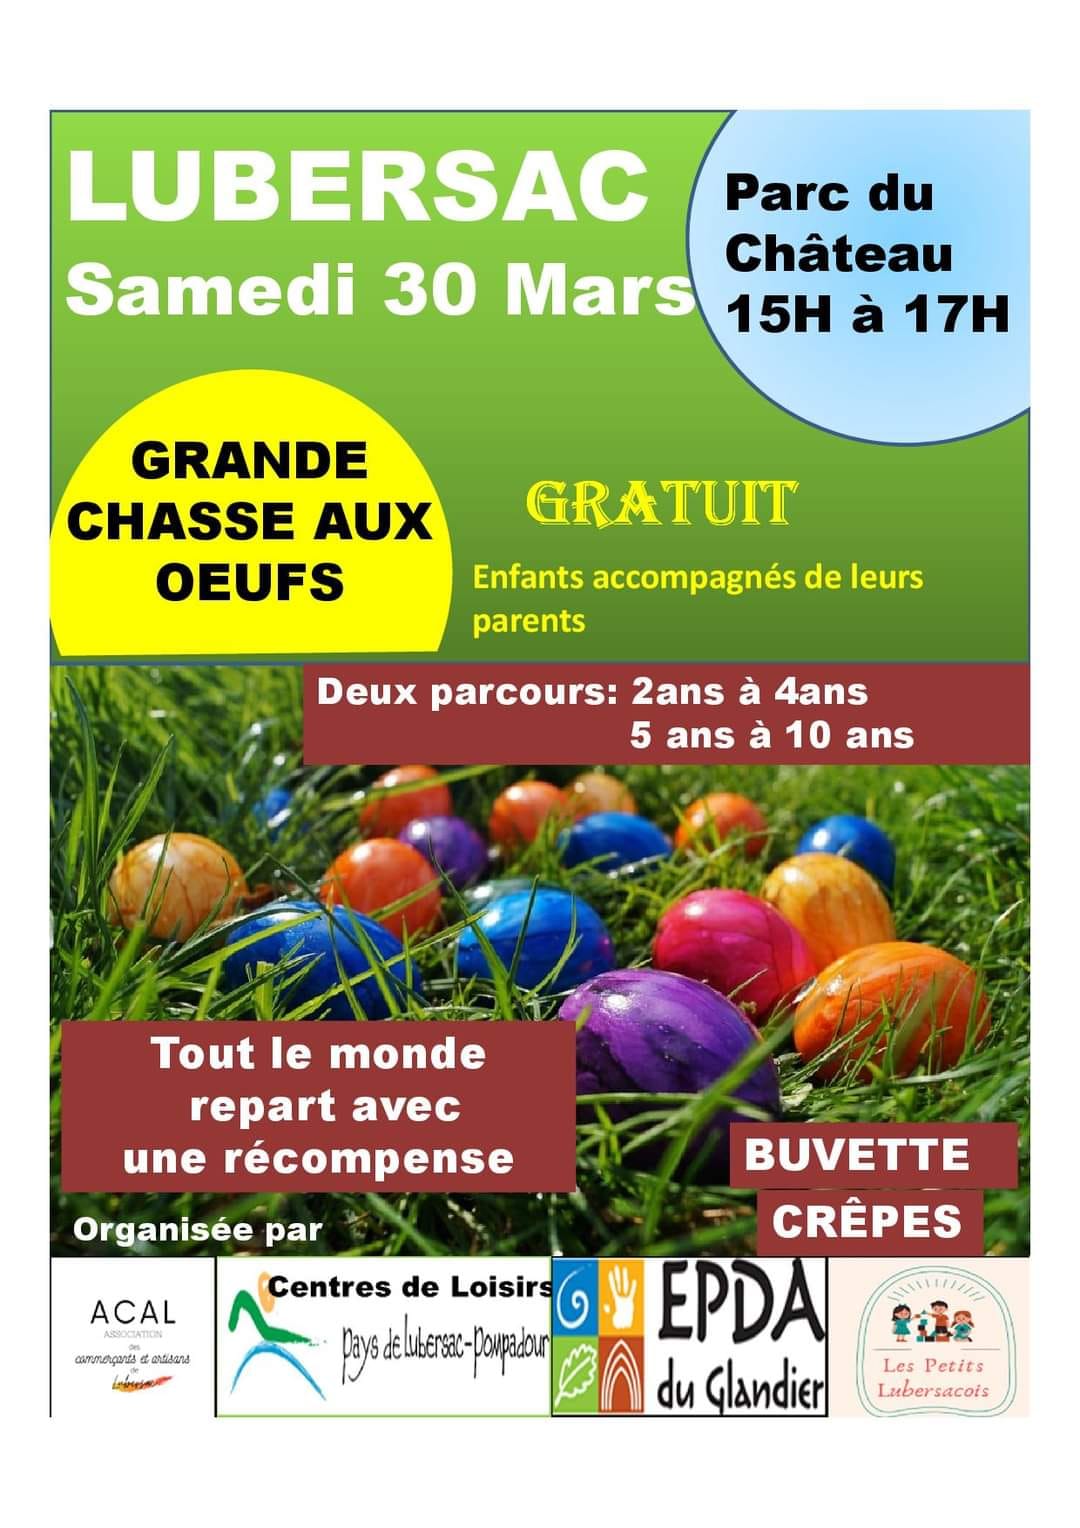 Chasse aux oeufs à Lubersac